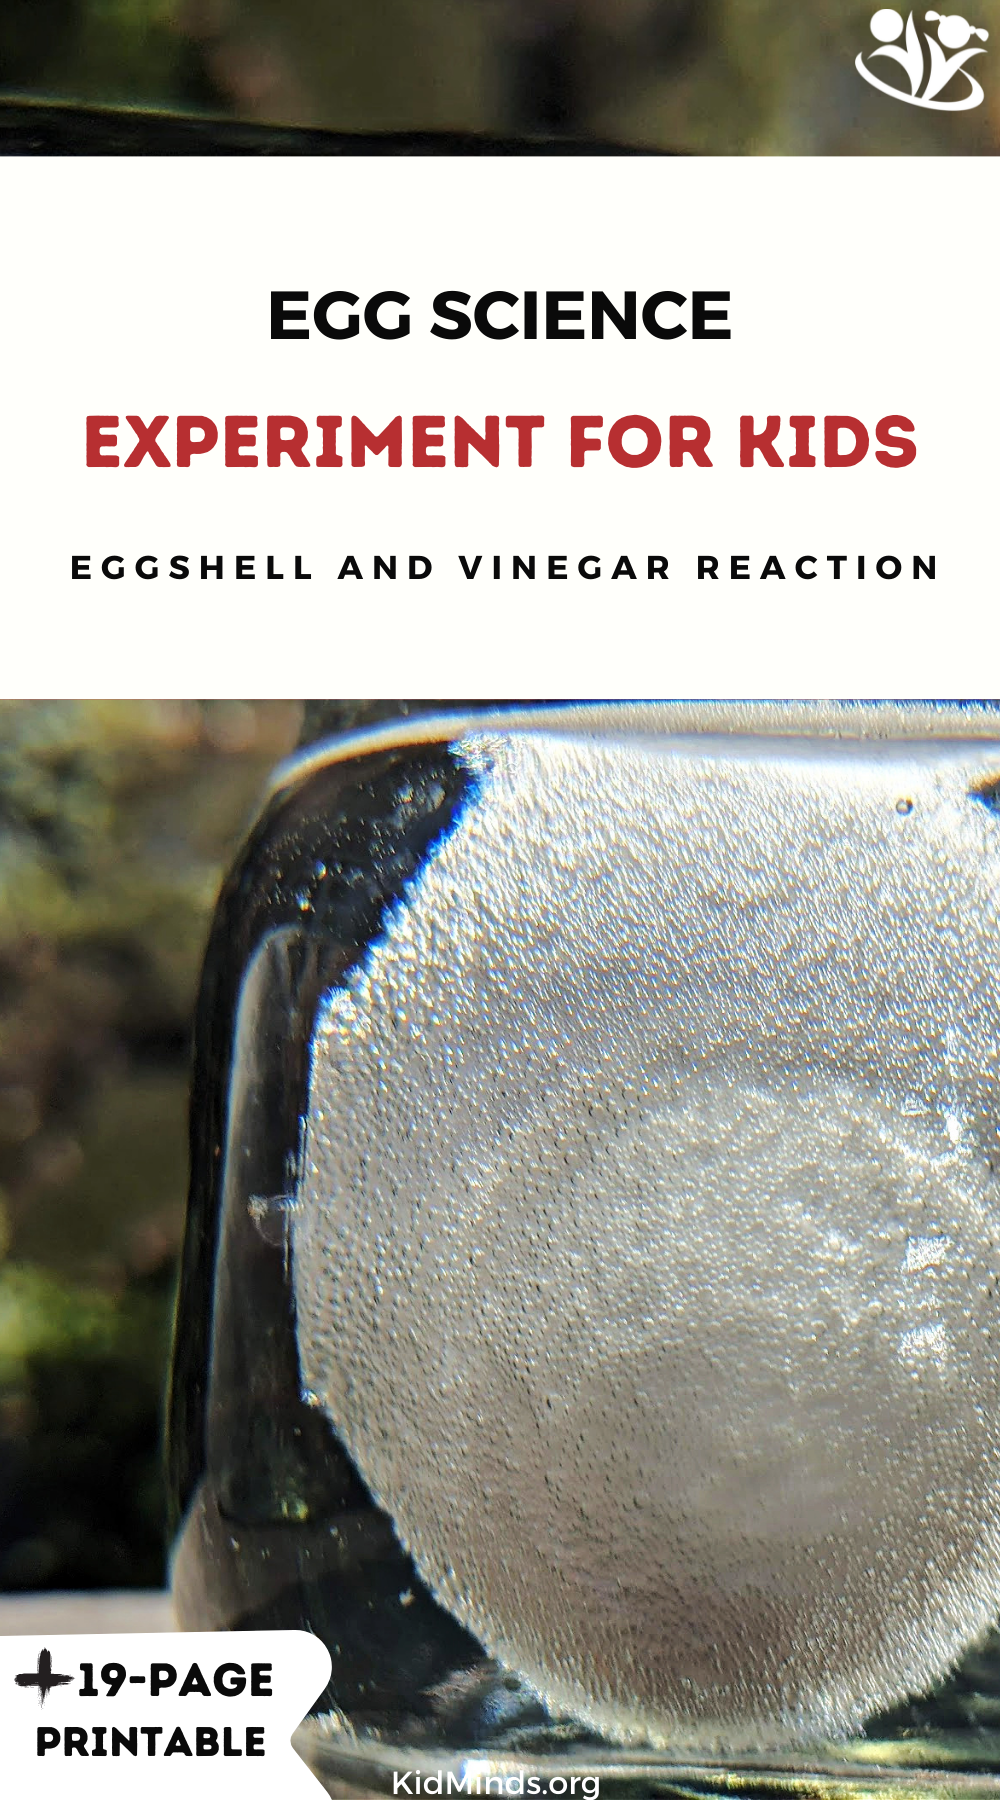 Whether you’re looking for an easy #science activity, a spring-themed #experiment, some kitchen science, a hands-on #egg exploration, or a kid-friendly introduction to #chemistry, this one is for you! #handsonlearning #kidsactivities #STEAM #calcium